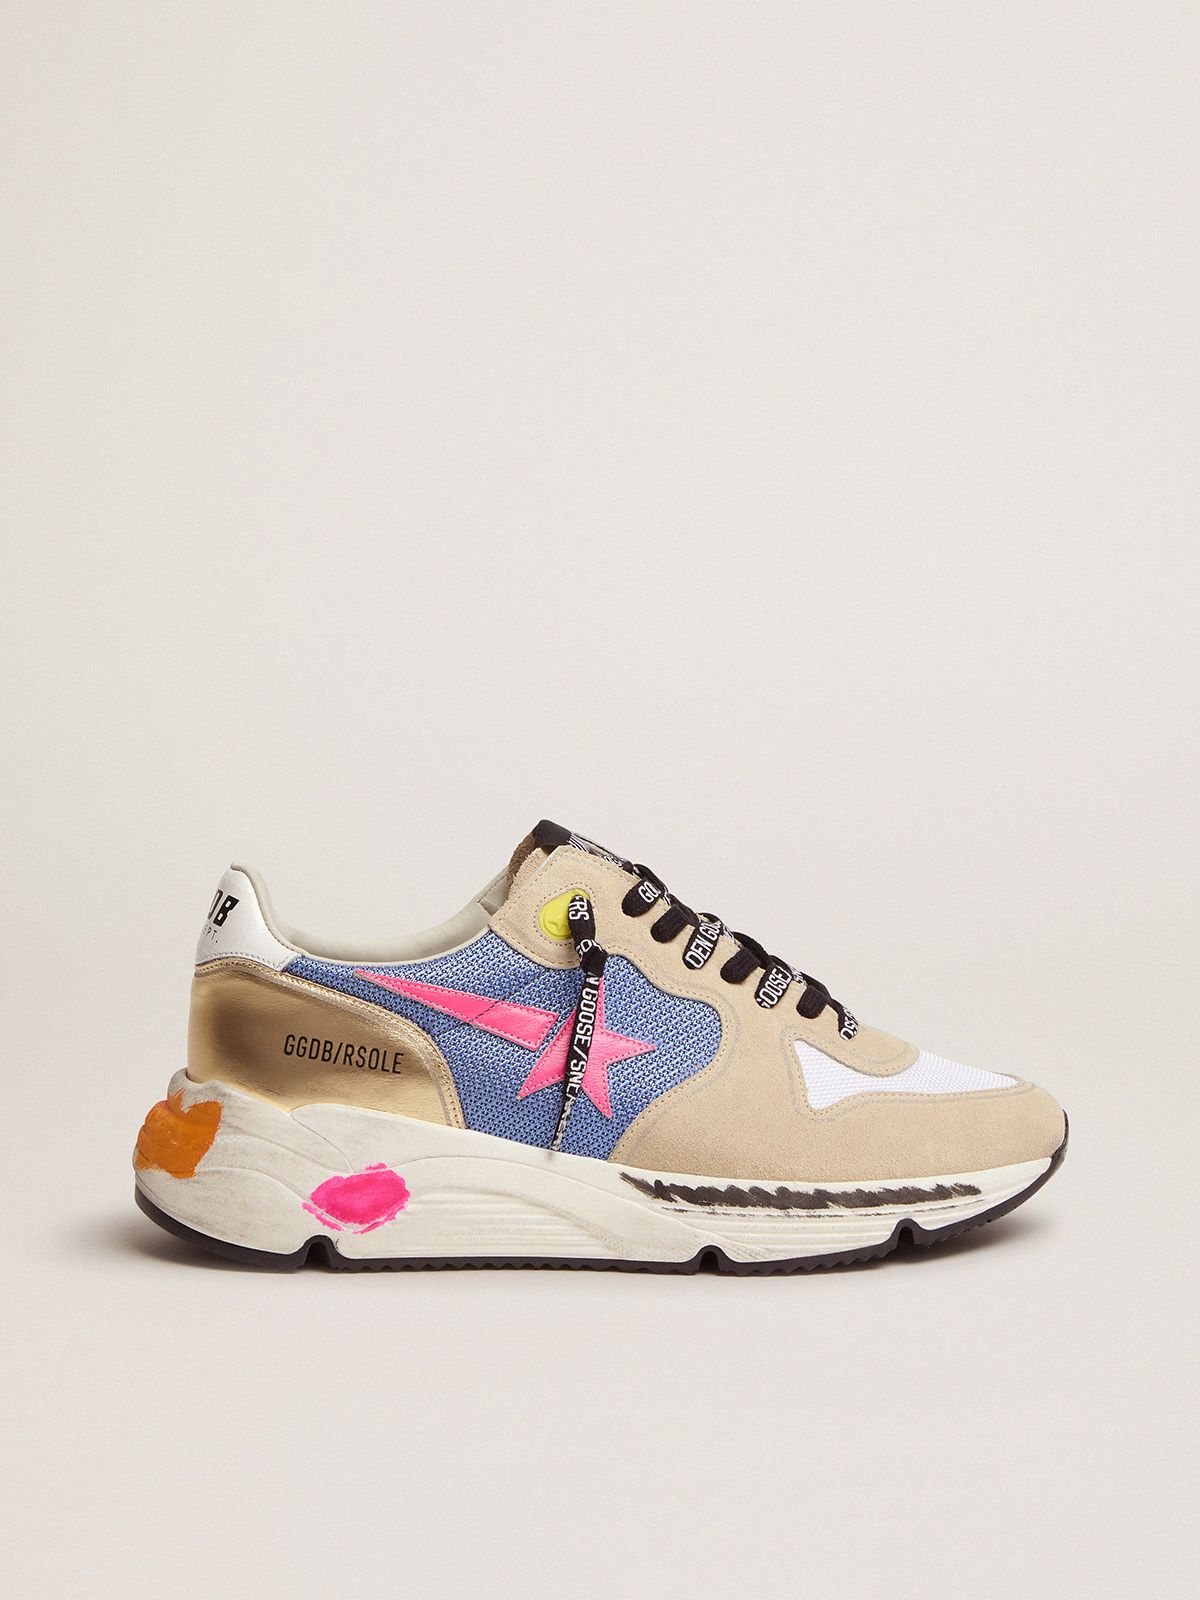 golden goose with Running in Sole gold suede sneakers detail